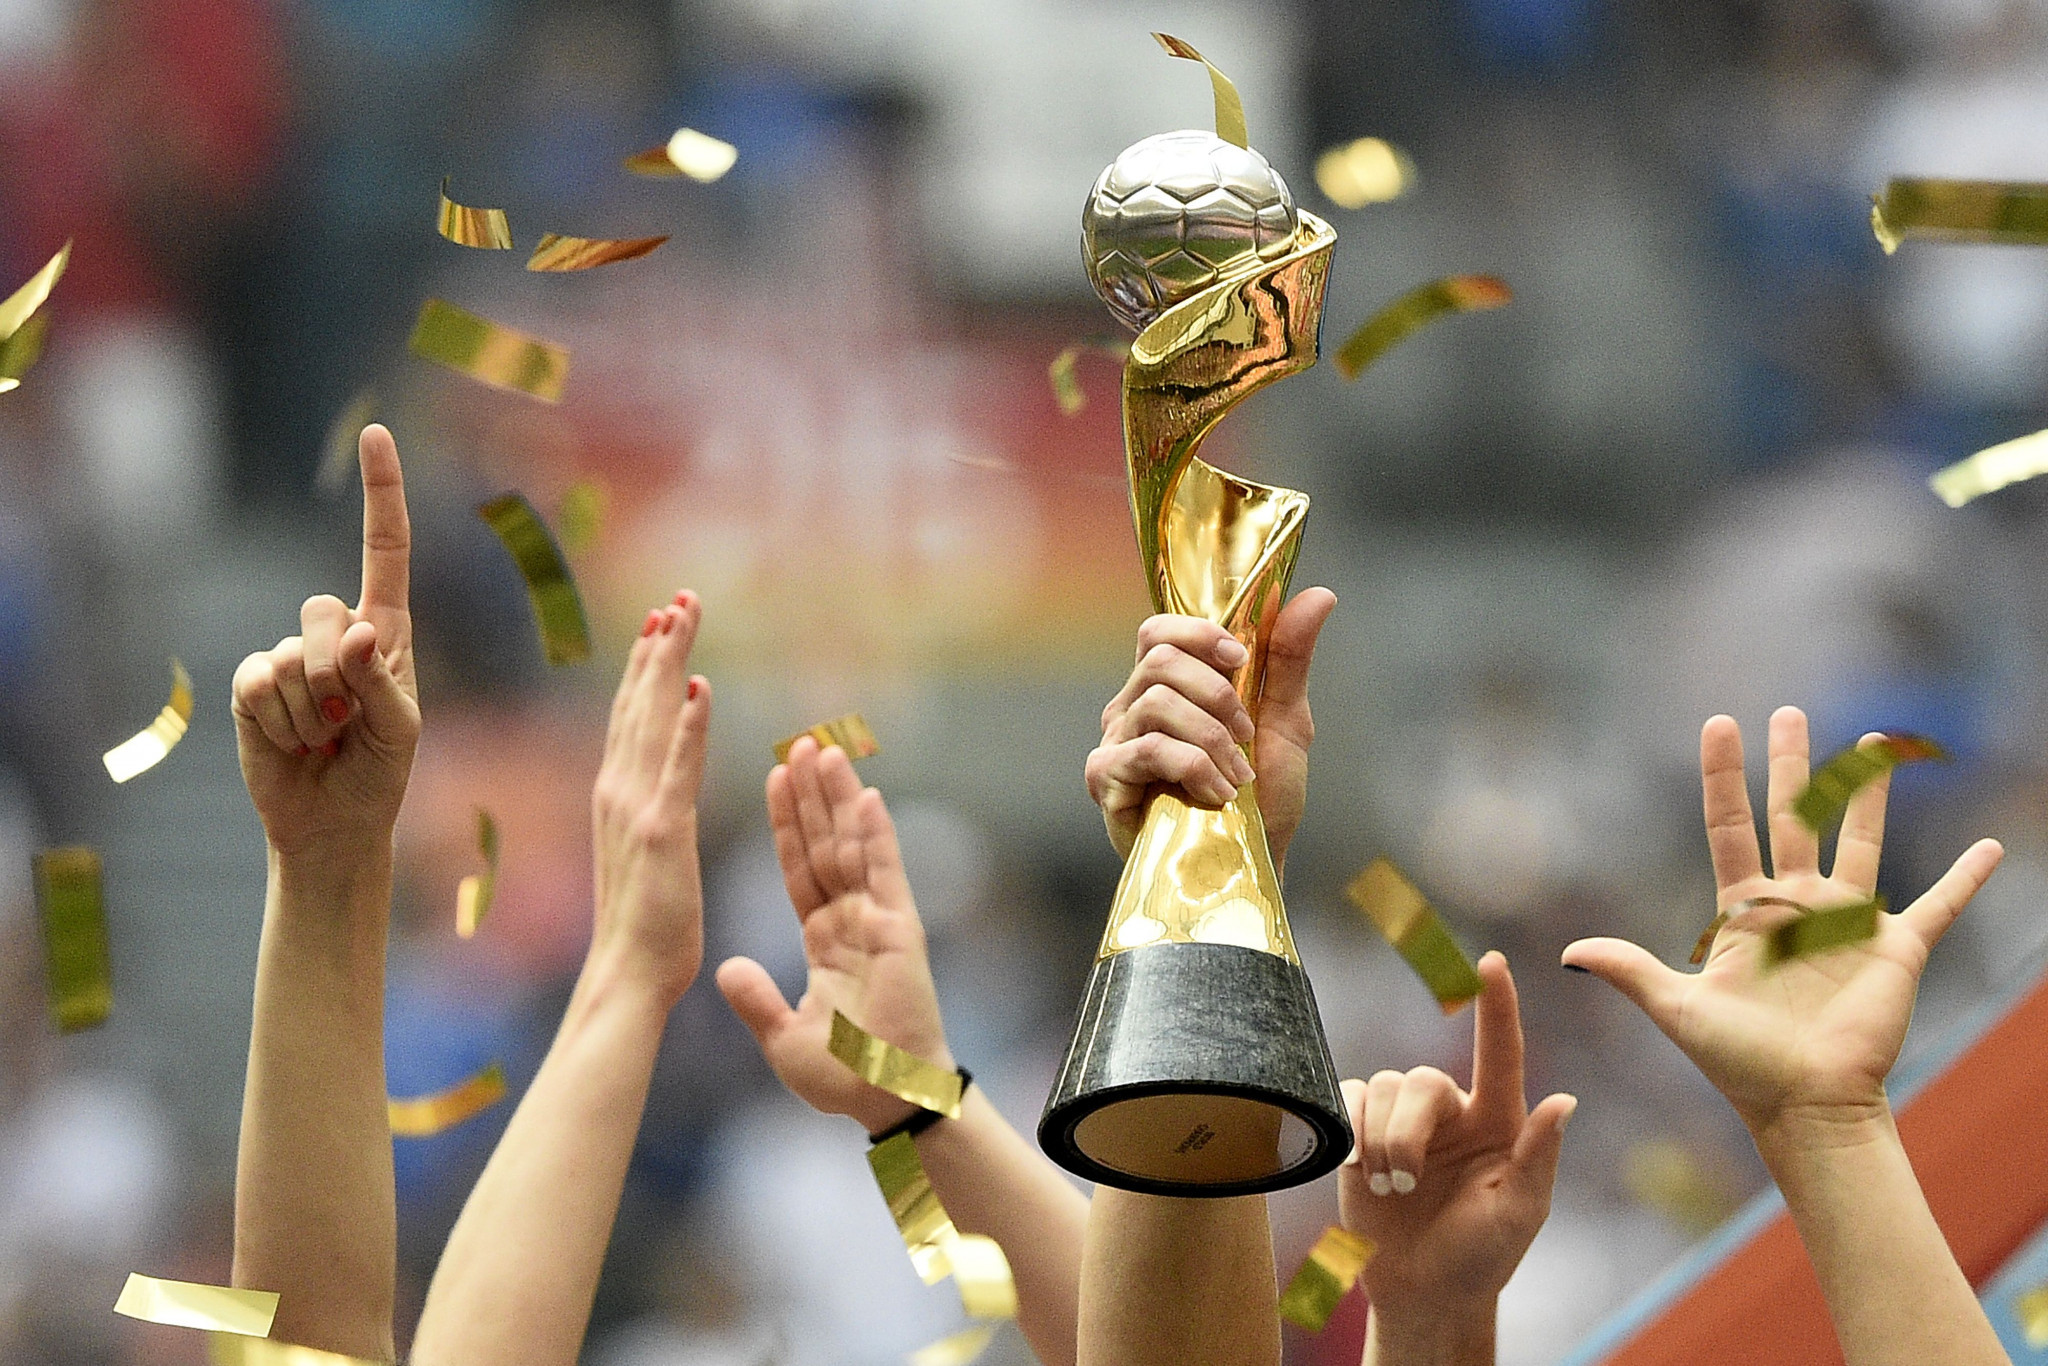 Four parties interested in hosting the 2027 FIFA Women's World Cup have signed binding agreements to adhere to the bidding process ©Getty Images